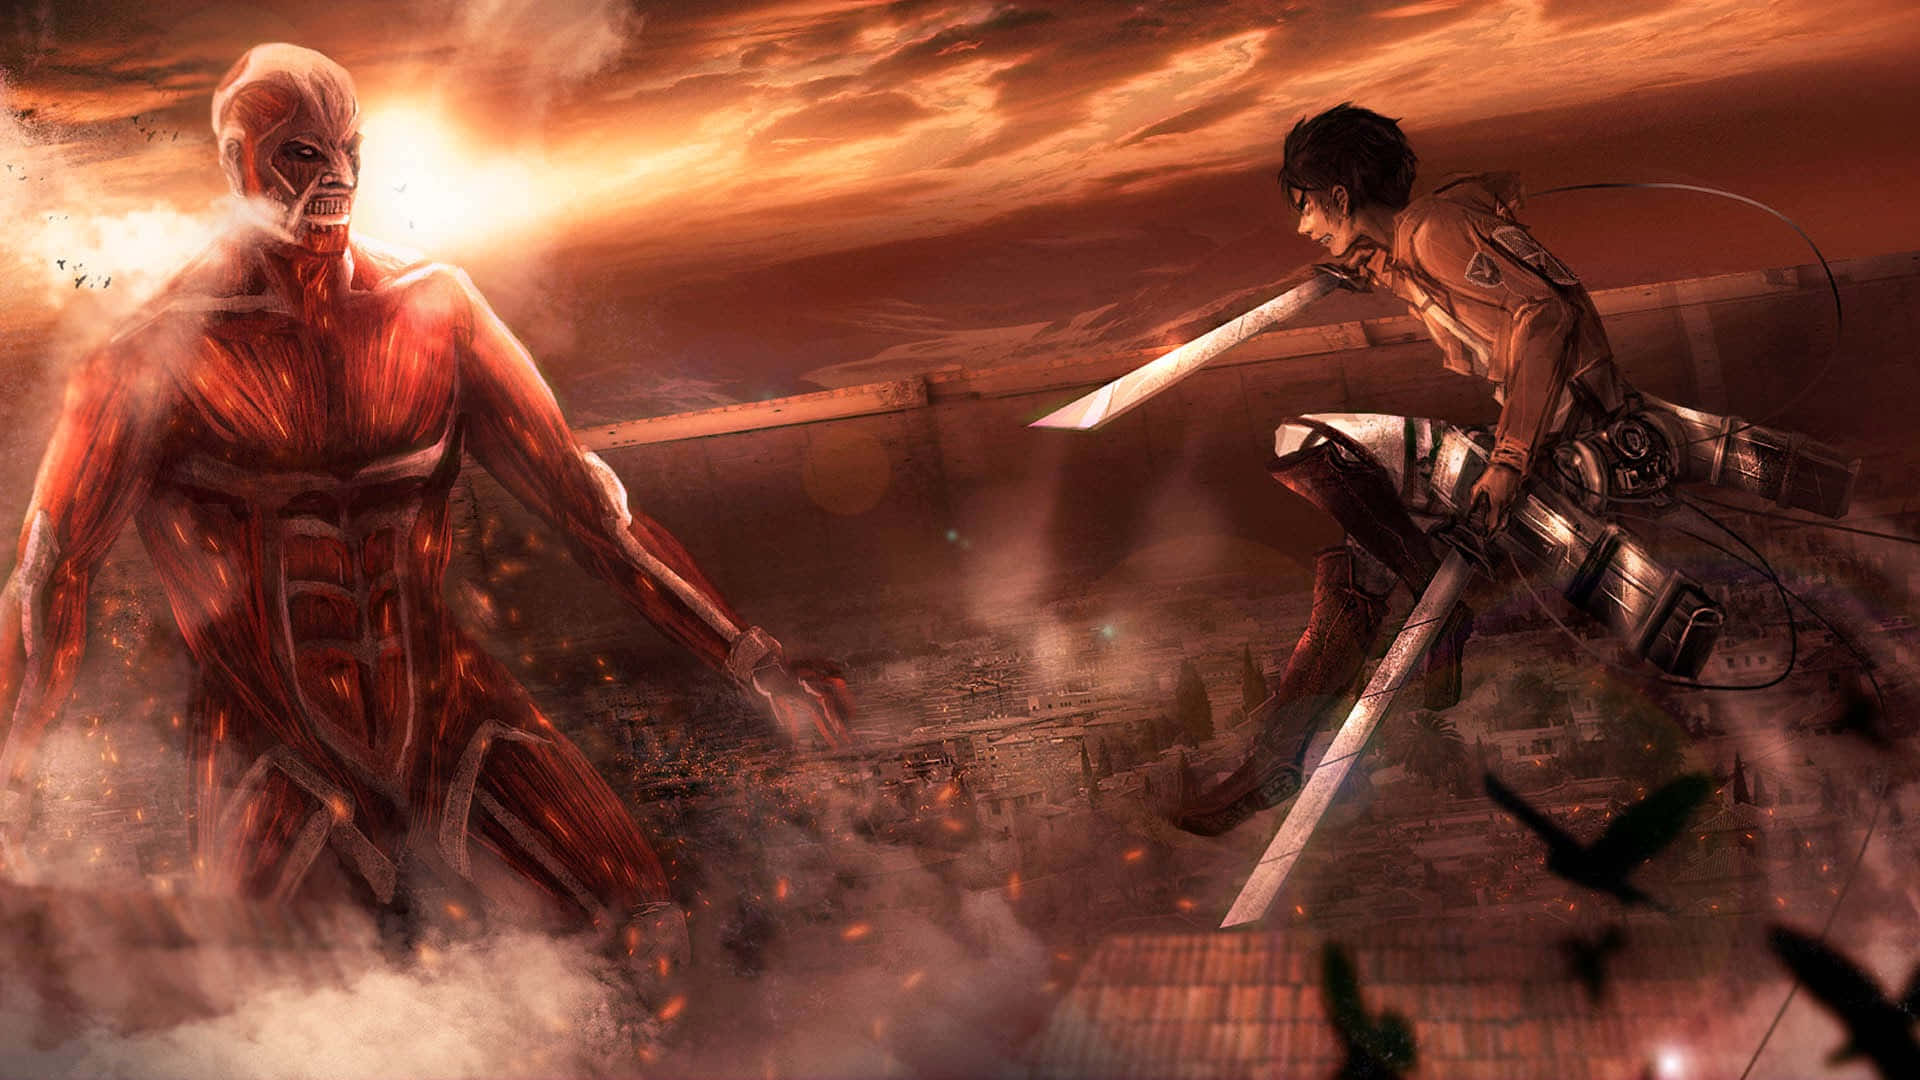 The gripping world of Attack On Titan comes to life in an exciting new video game! Wallpaper